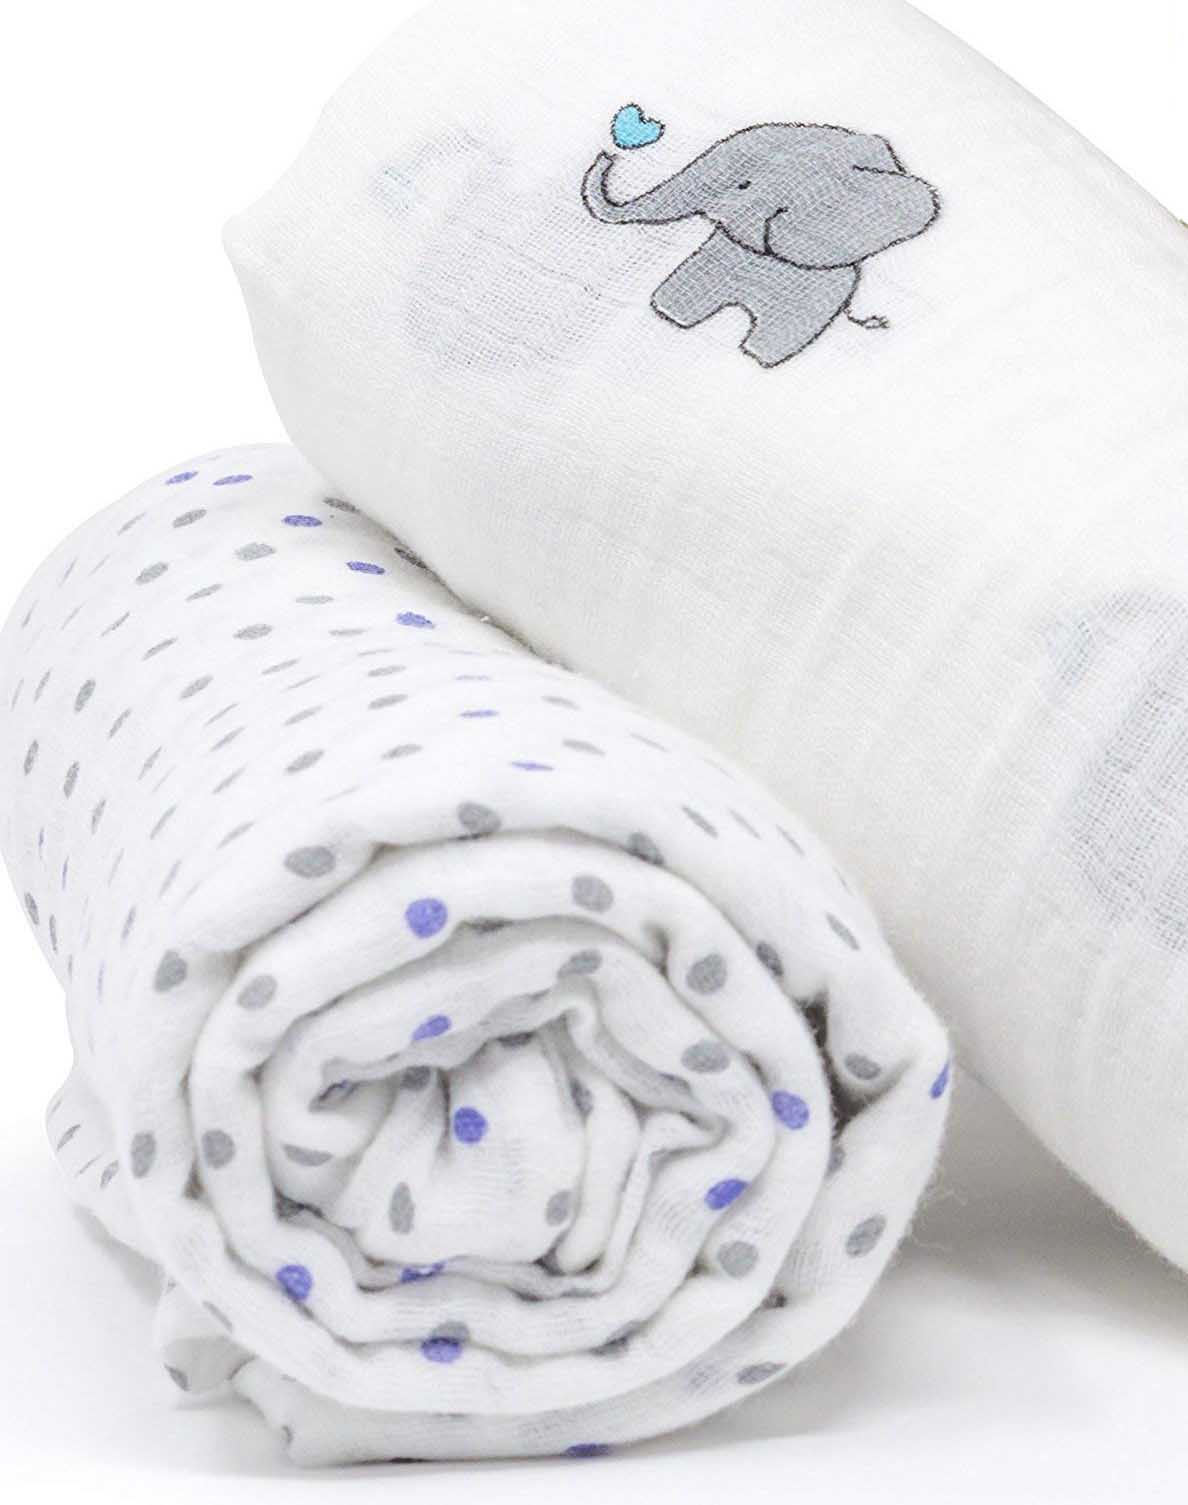 Swaddle Blanket For Stroller Buggy And Baby Bed Pure Cotton Baby Blankets Newin Star Baby Muslin Swaddling Blanket Giraffe/Elephant 